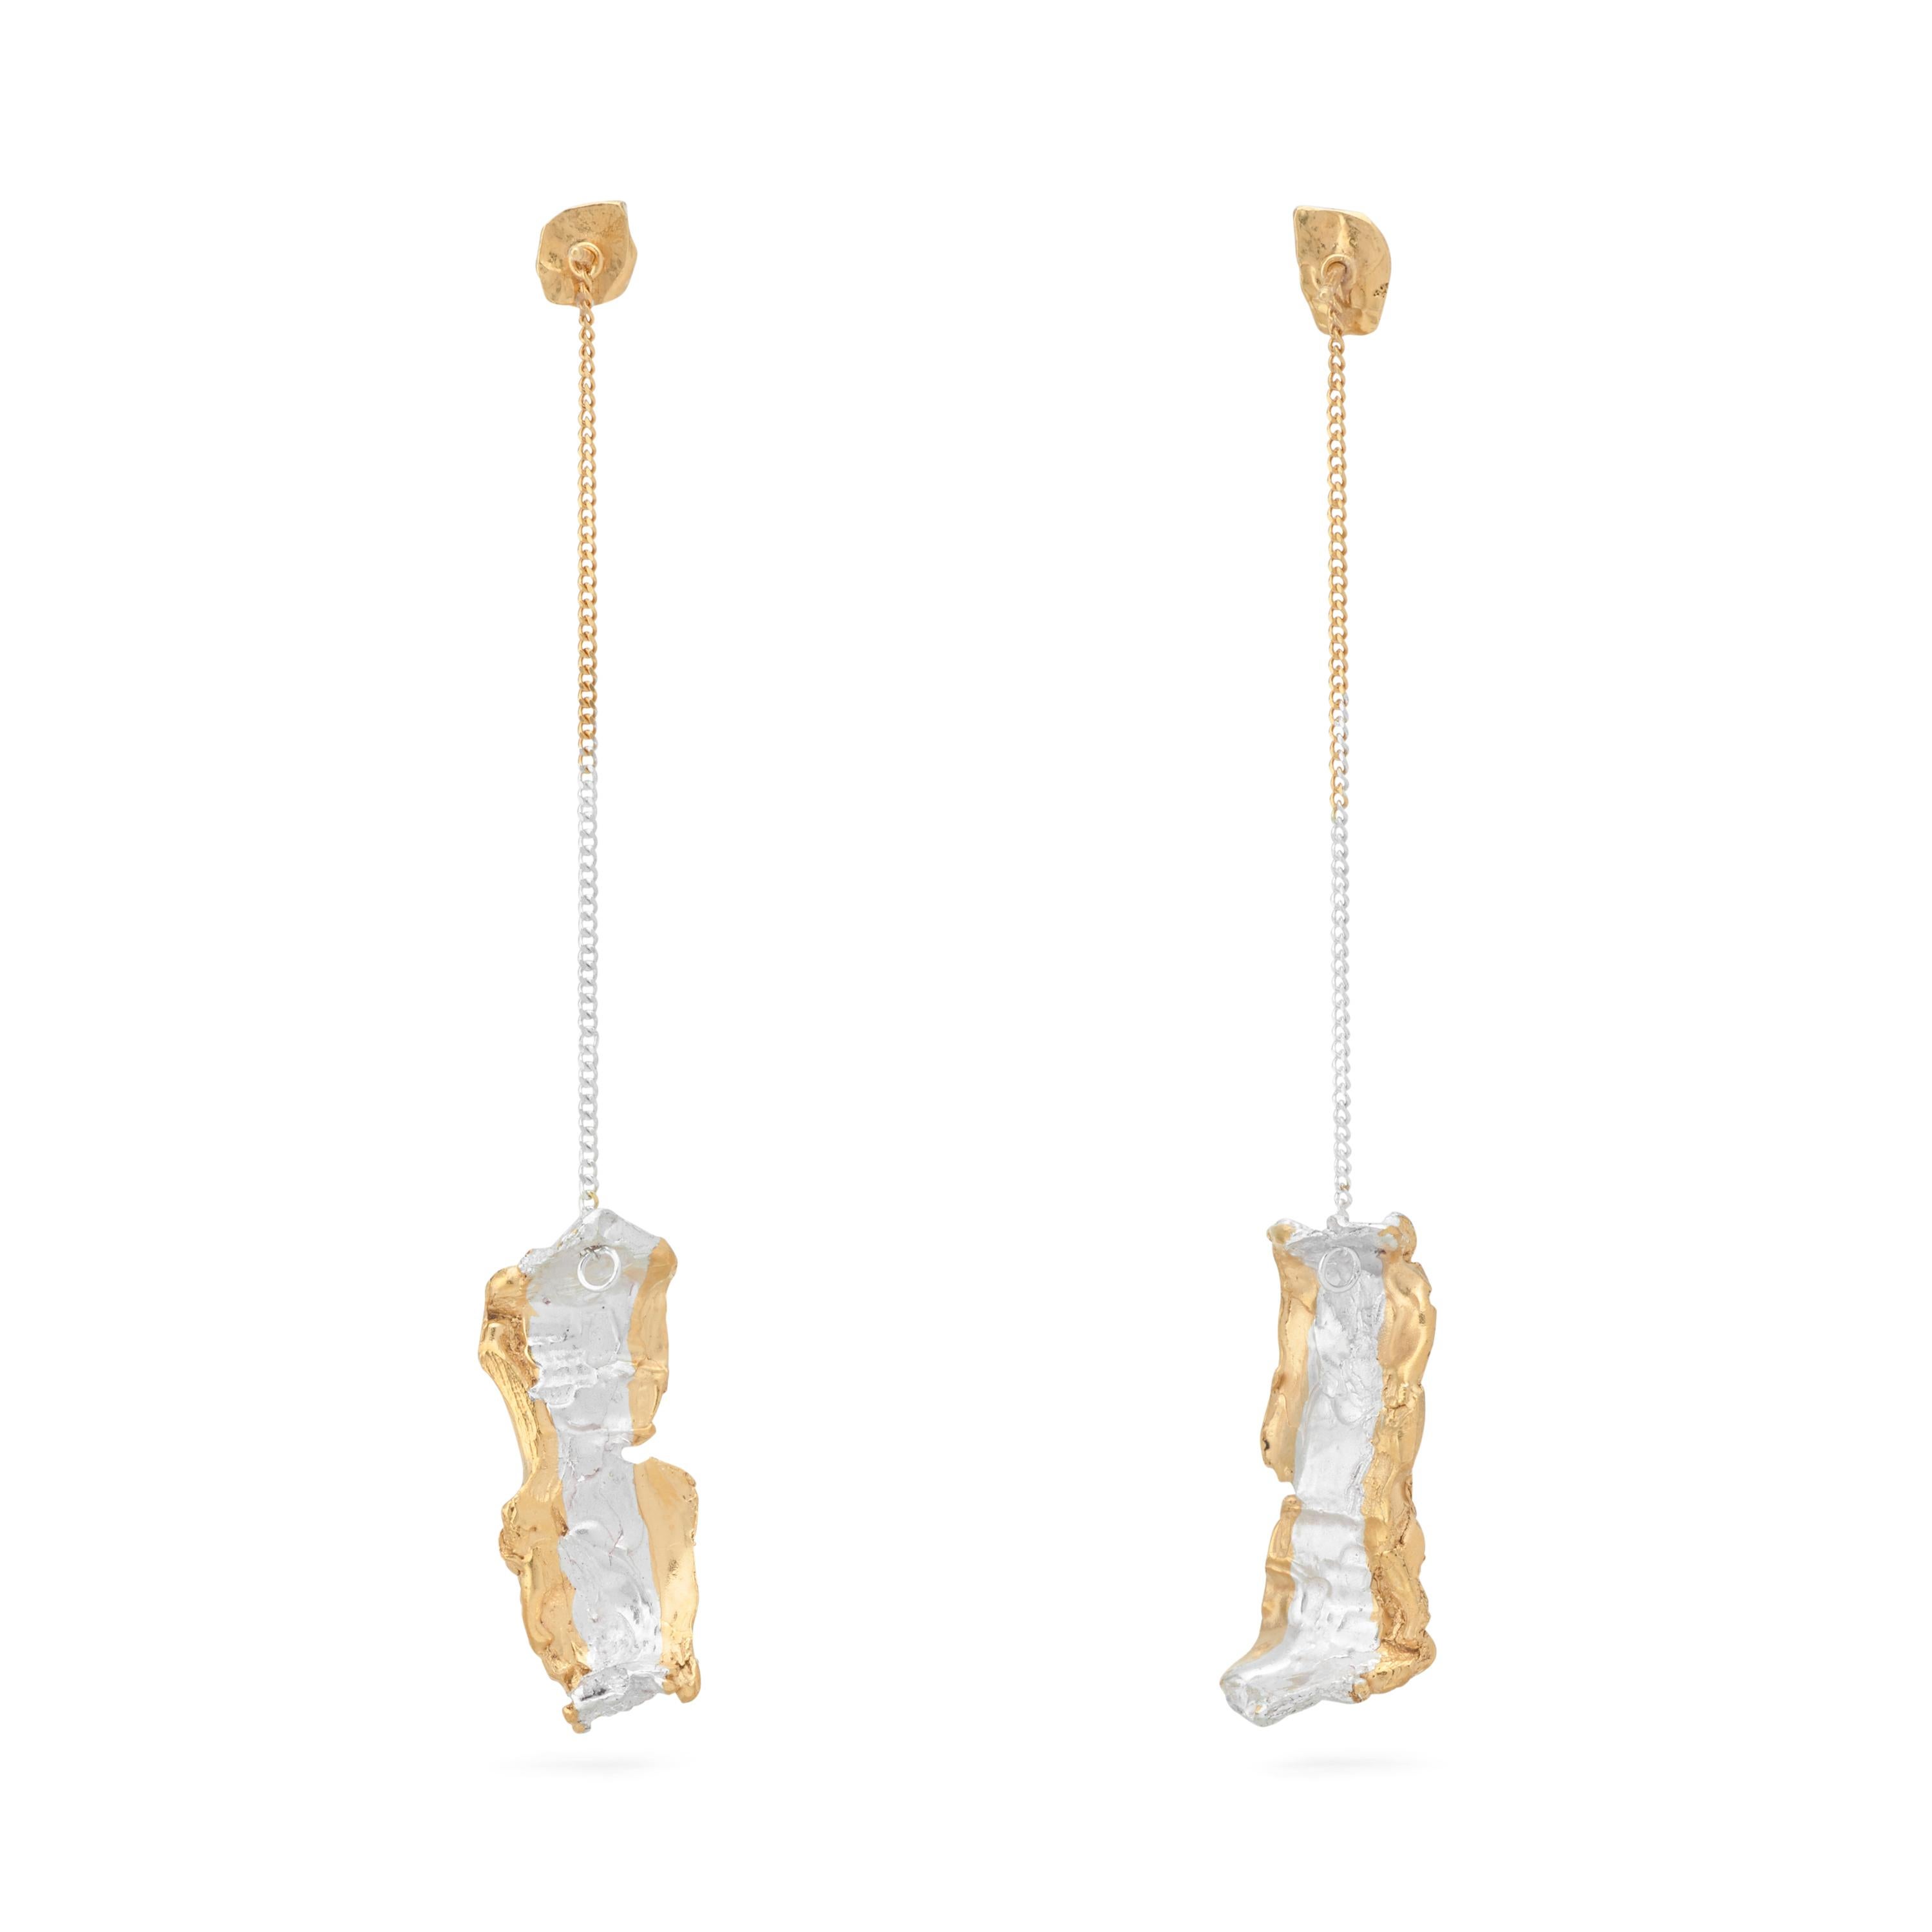 These earrings hang from the ear with an effortless grace, in the same way that water descends rocky slopes with a seemingly eternal rhythm. Their unusual, swirling textures and combination of gold and silver colours – like the interplay between